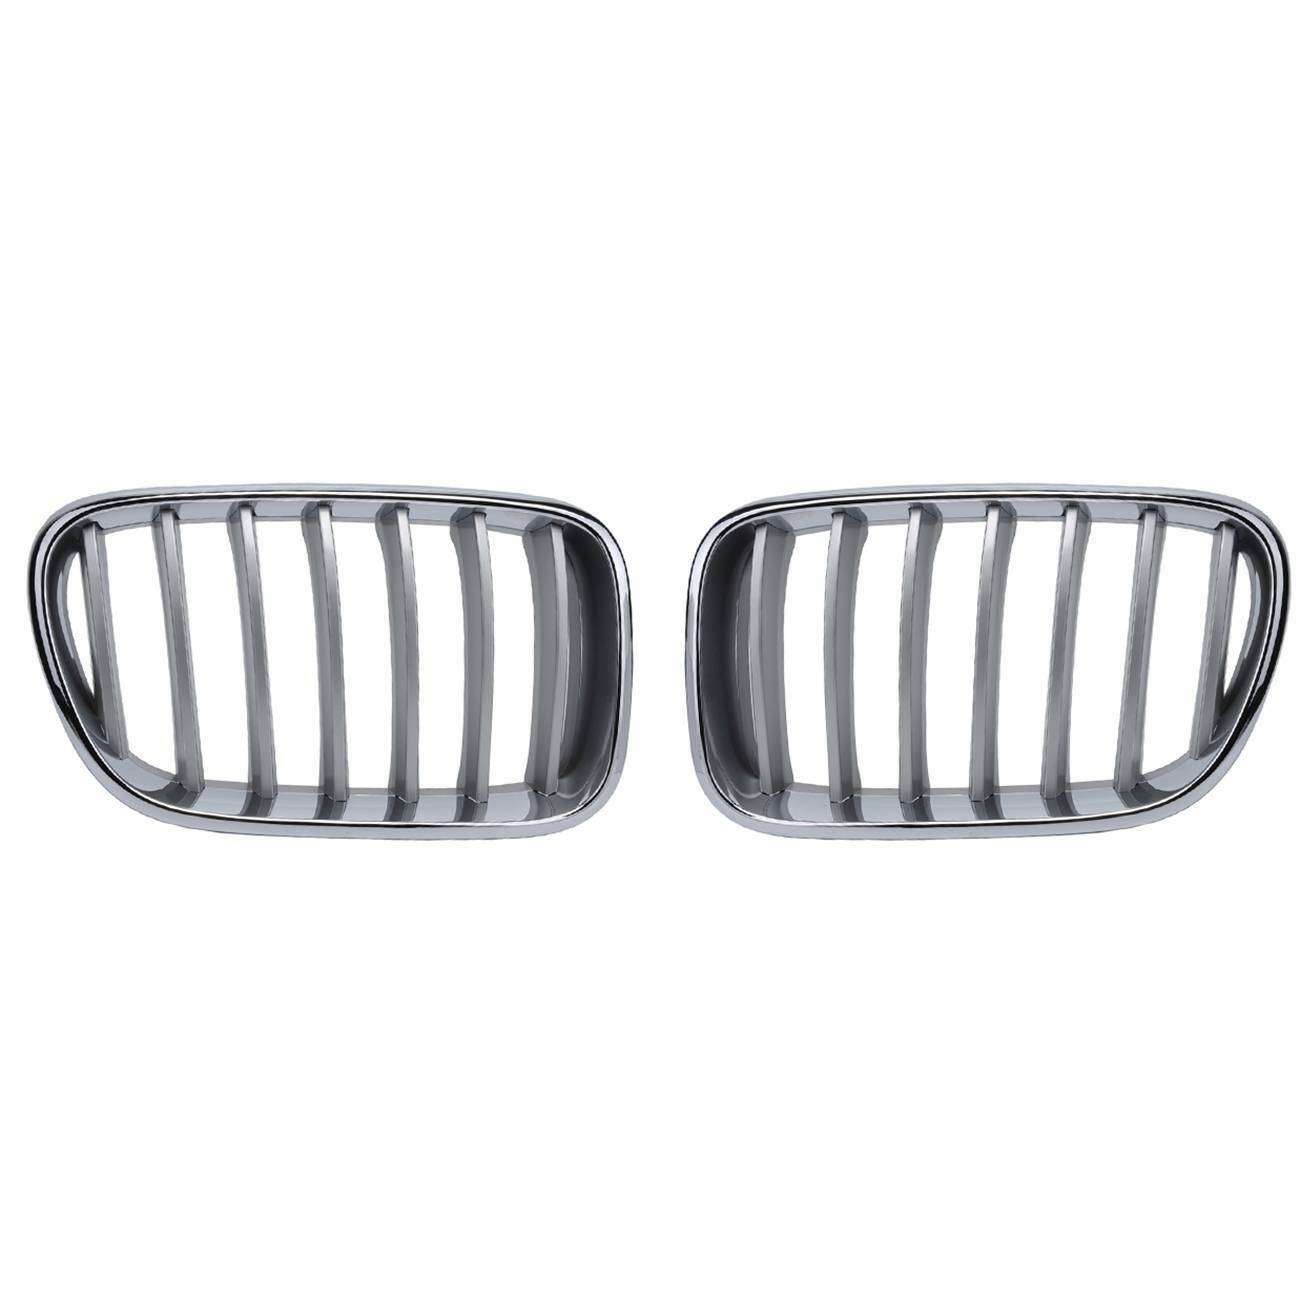 2Pcs Front Left + Right Kidney Grille Kit for BMW F25 X3 xDrive 20i 20d 28i 30d German Made